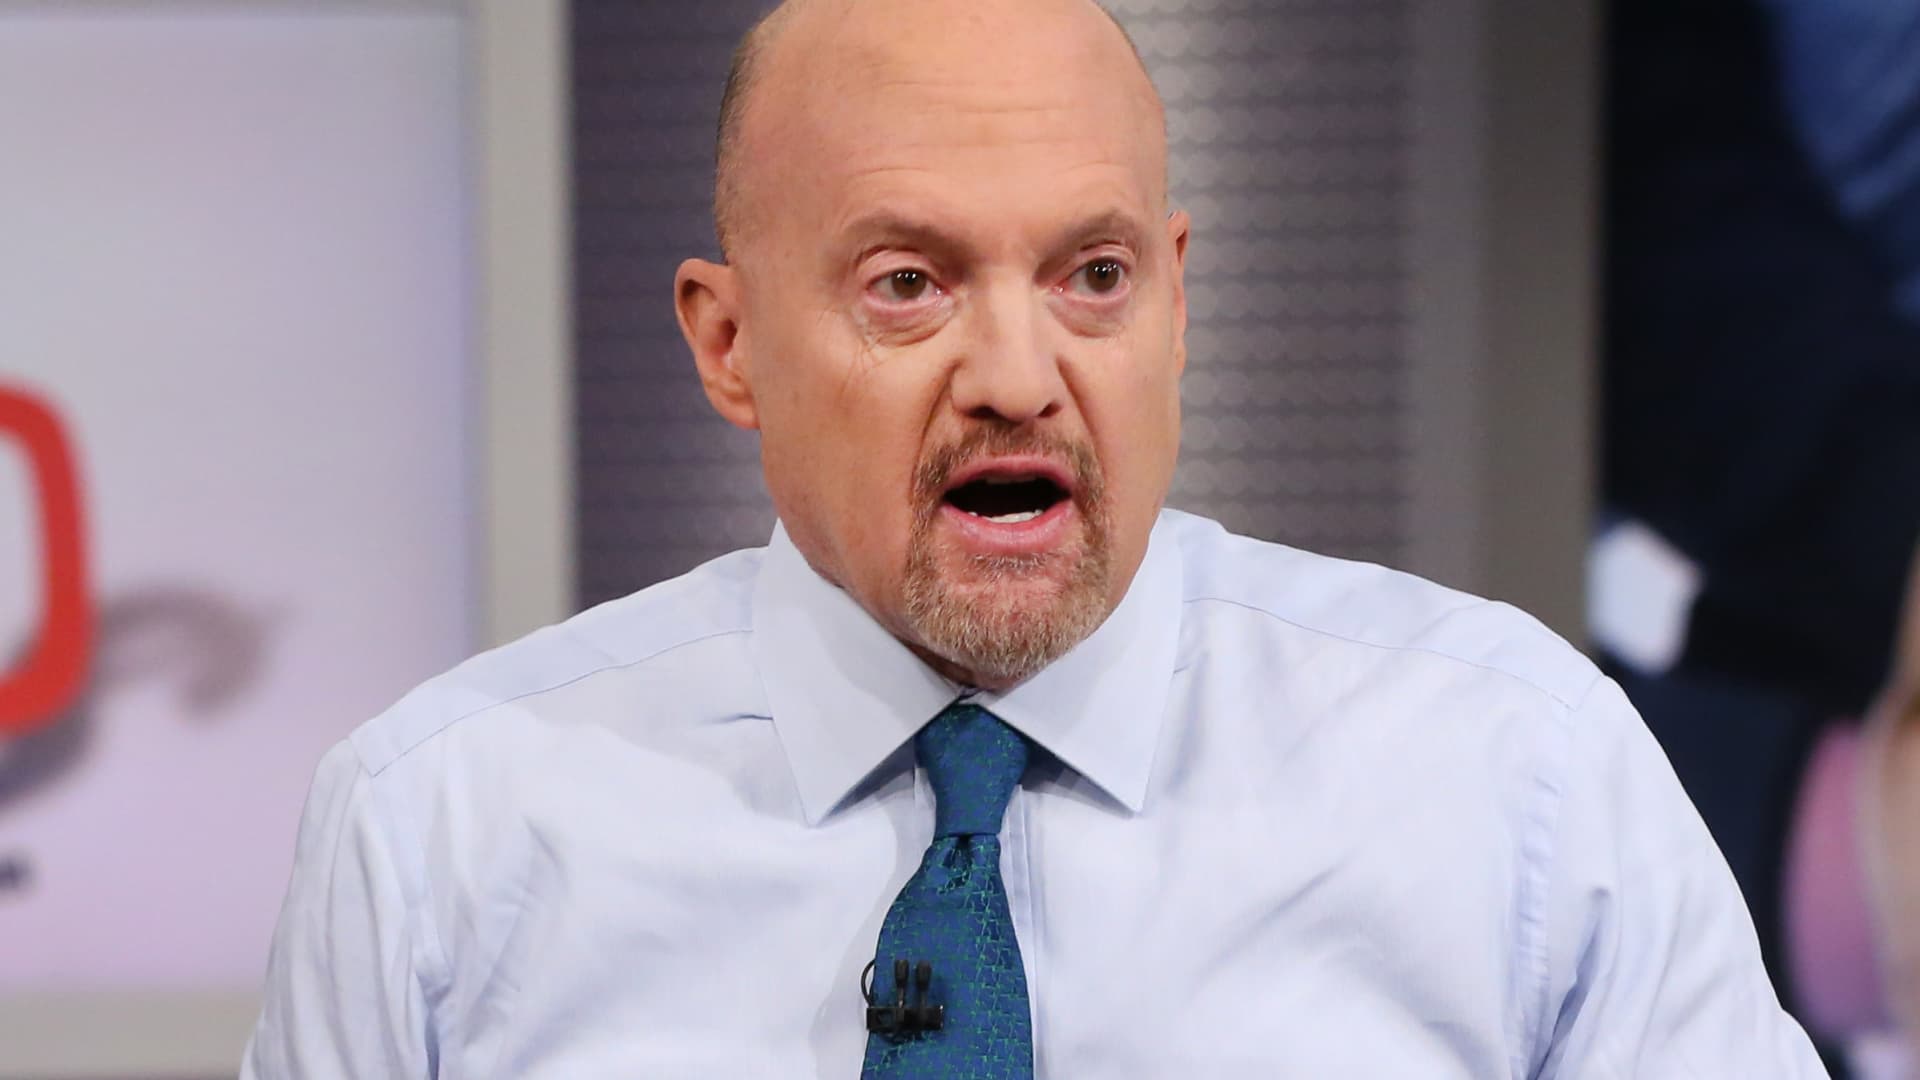 Jim Cramer reviews 8 companies that could top $1 trillion in market cap